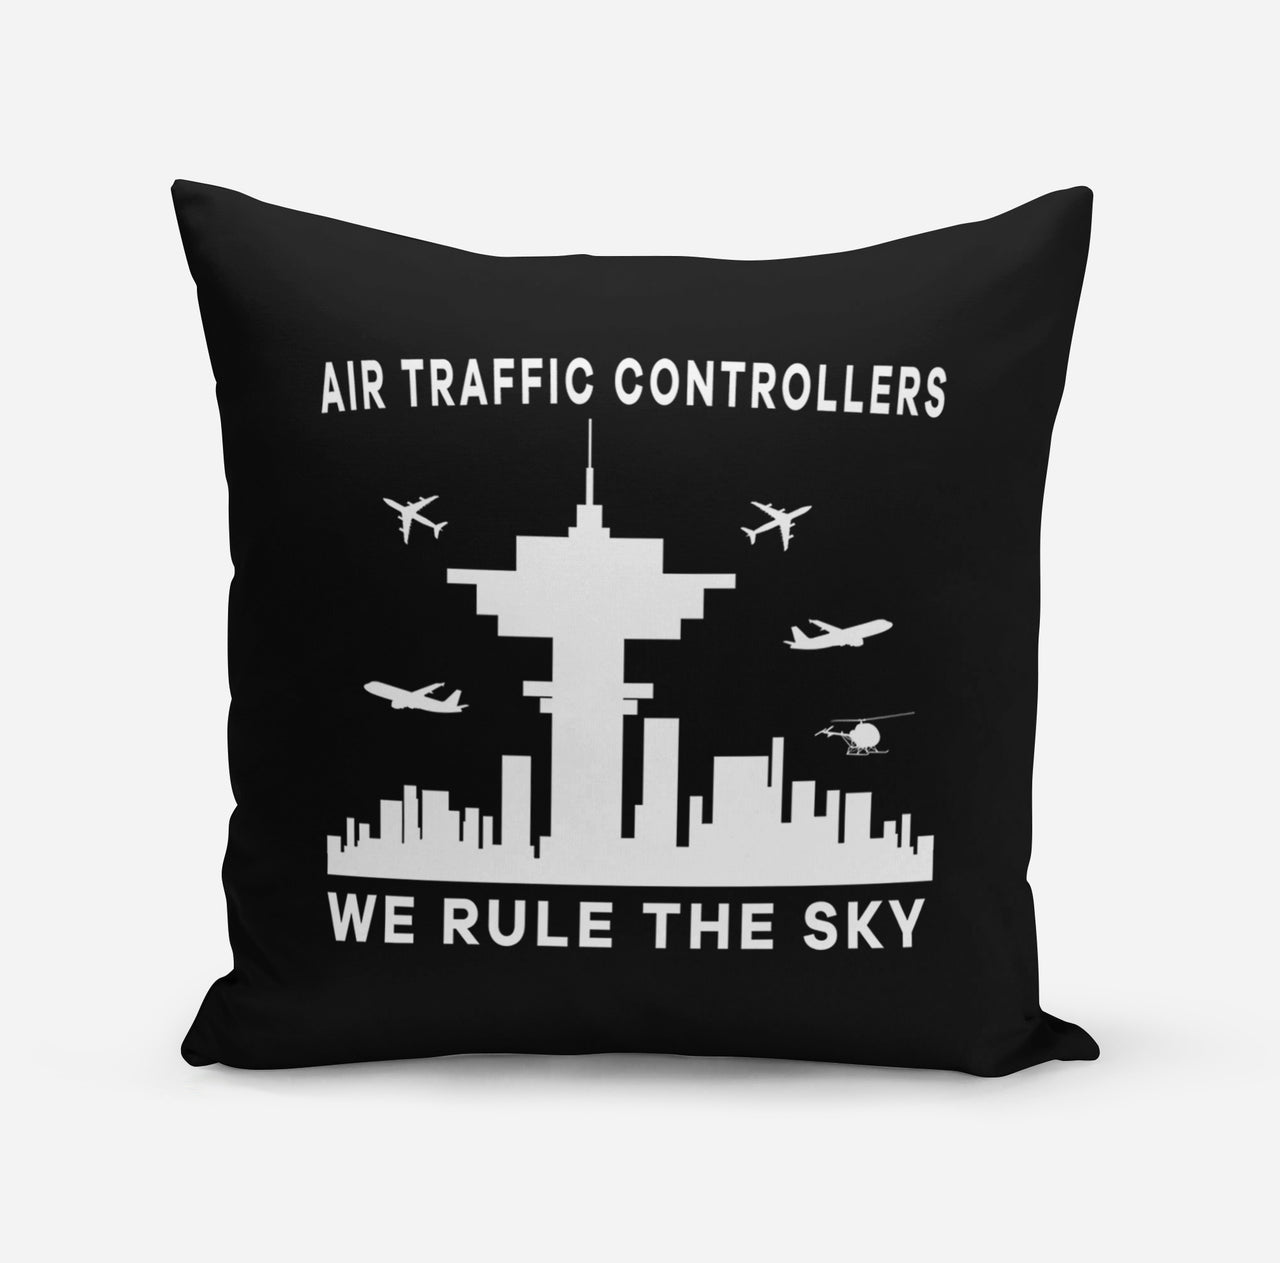 Air Traffic Controllers - We Rule The Sky Designed Pillows